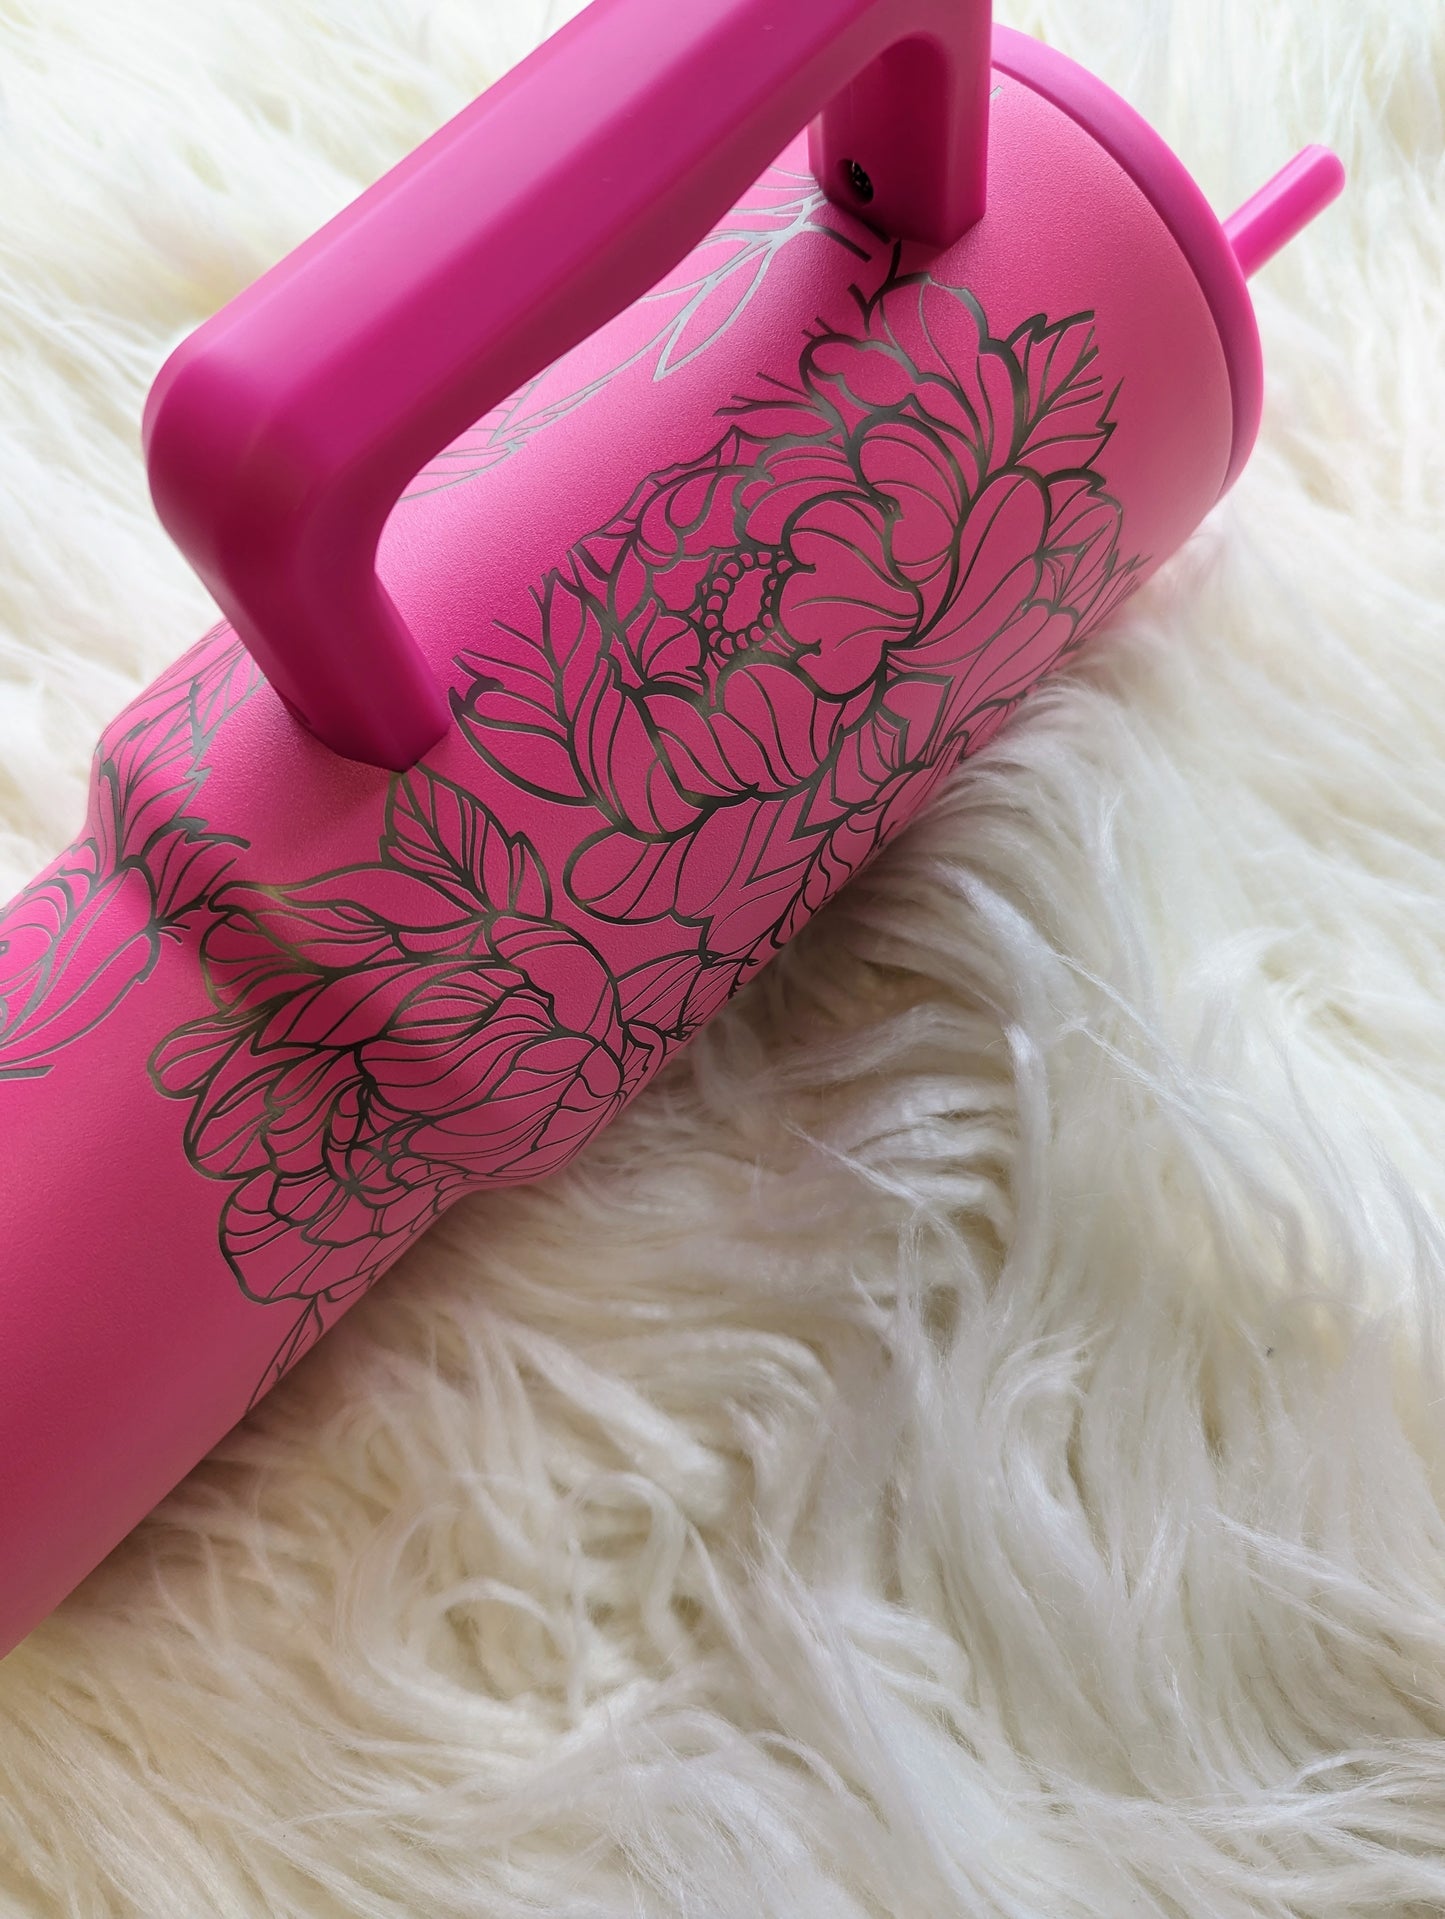 Peony floral pattern engraved on hot pink 40 oz insulated tumbler with handle by Simple Modern